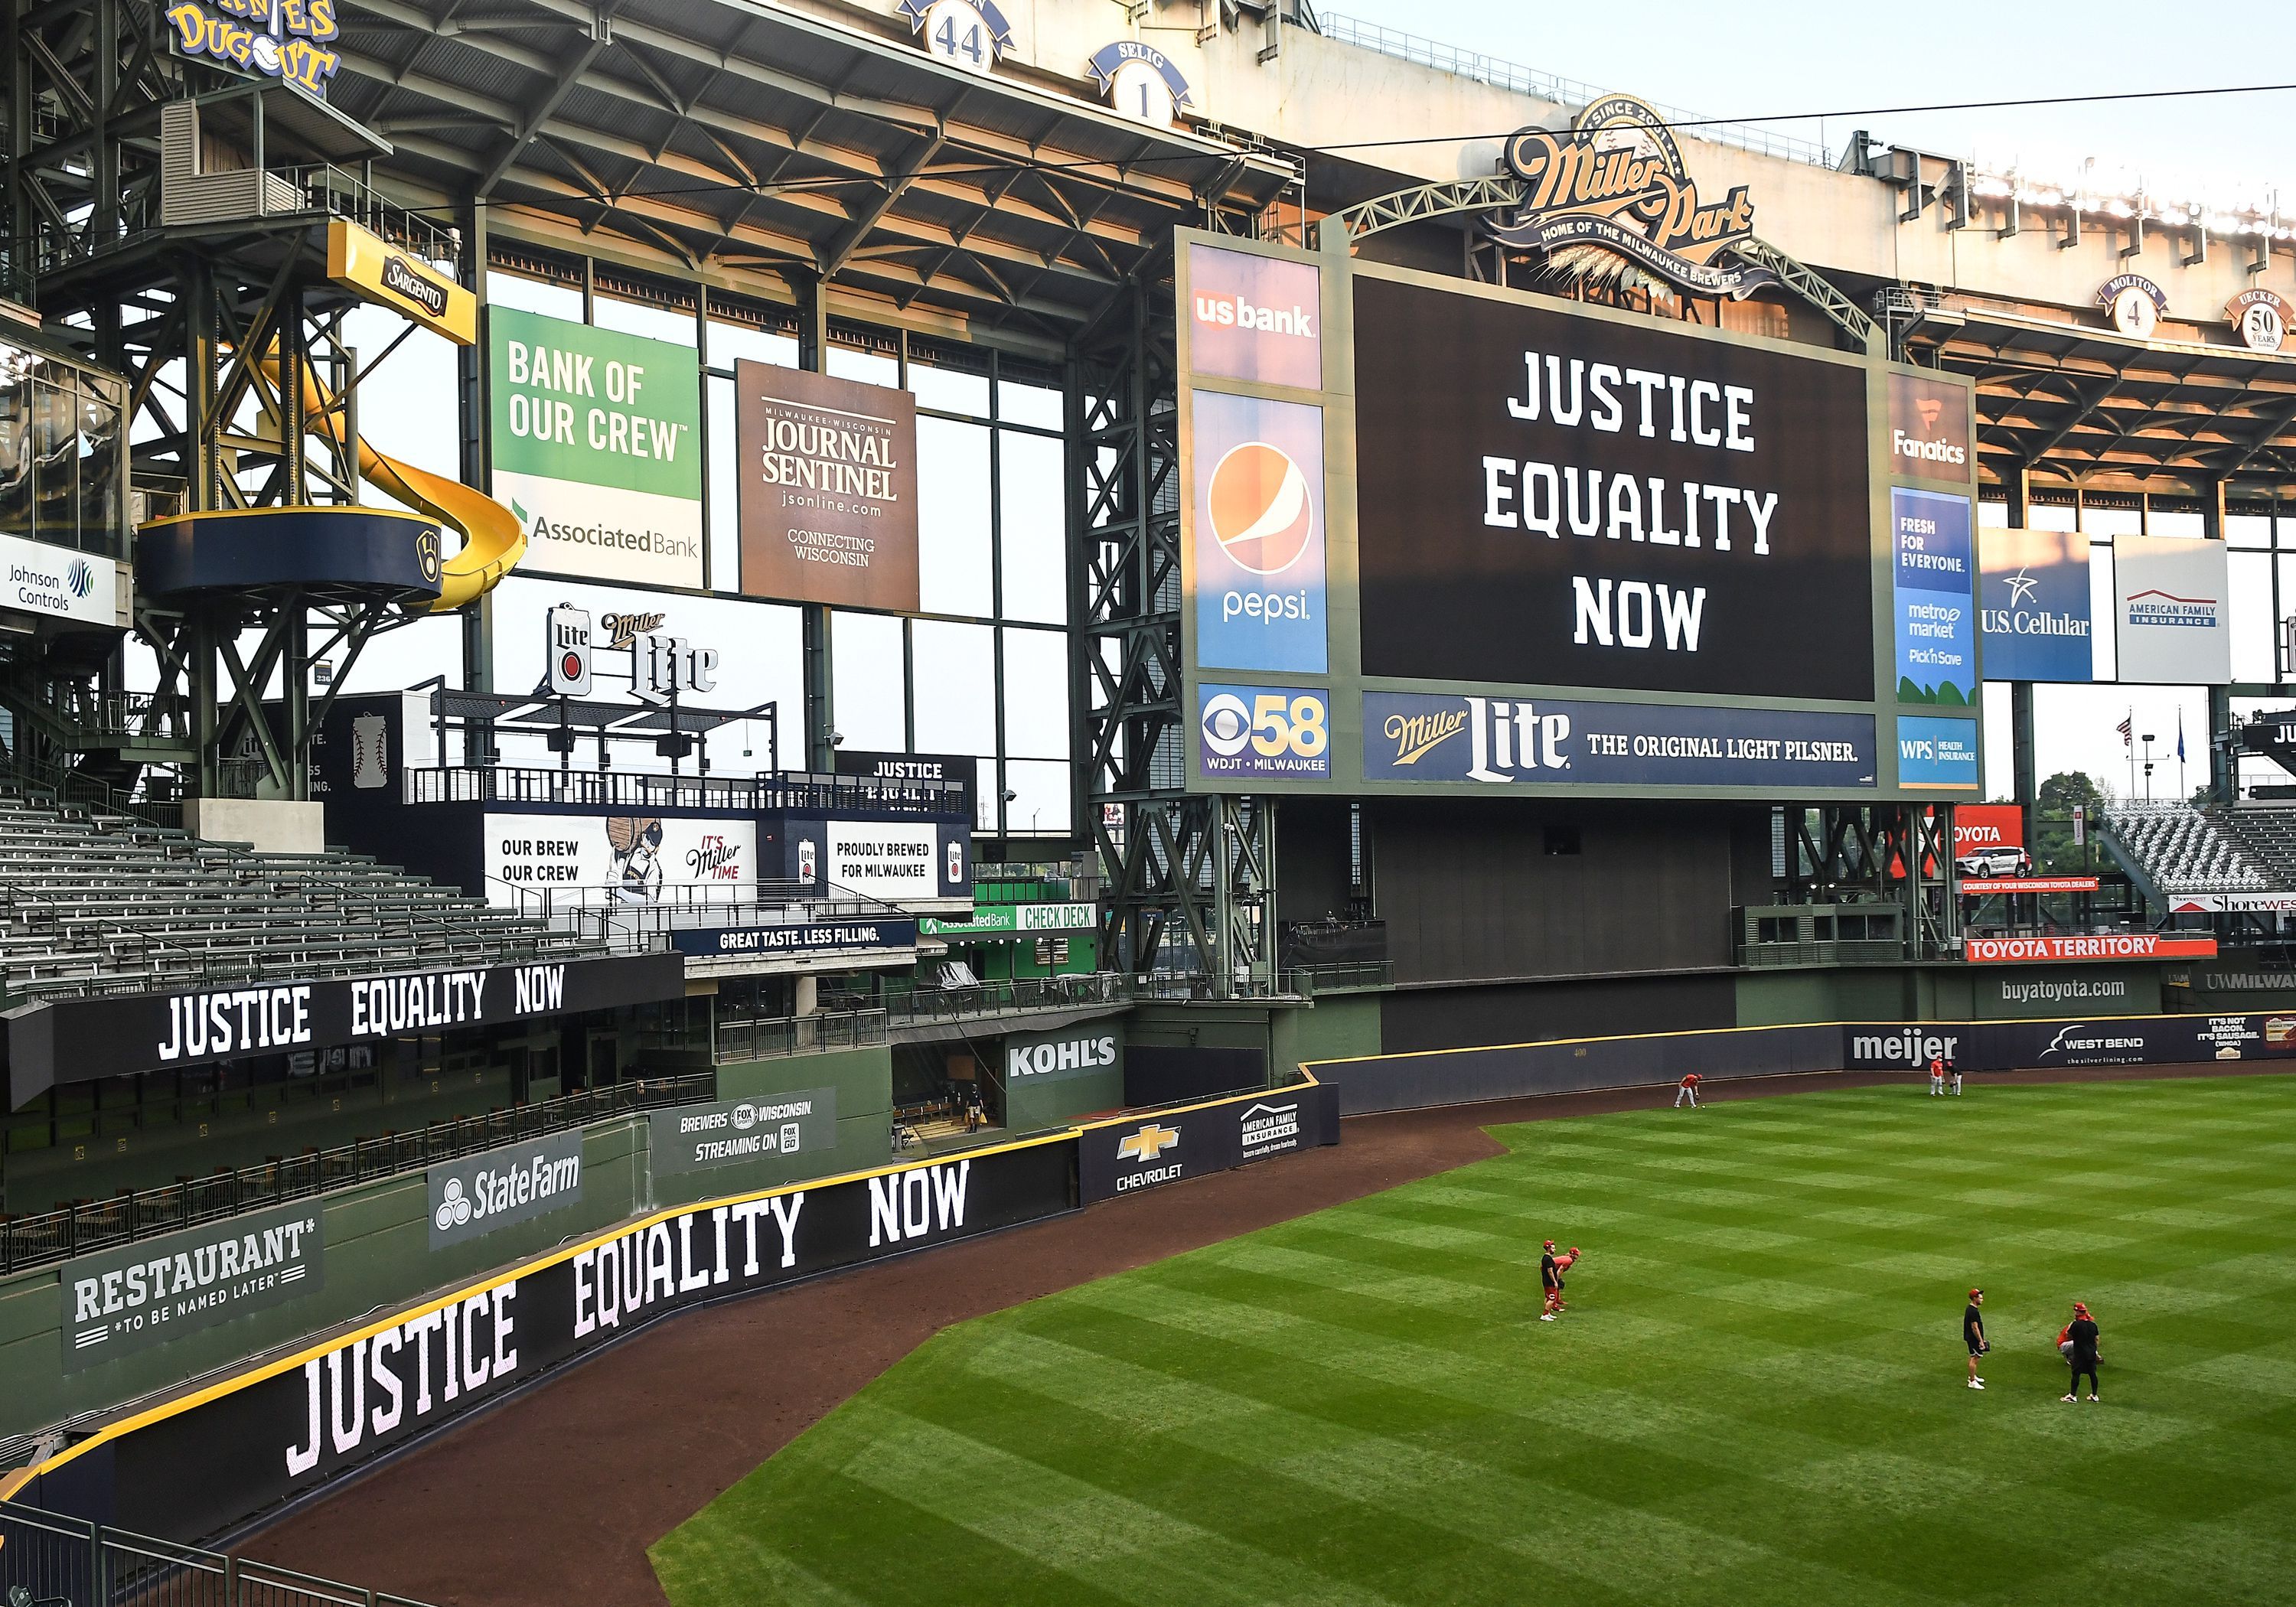 The words "Justice Equality Now" on the jumbotron at Milwaukee's Miller Park.